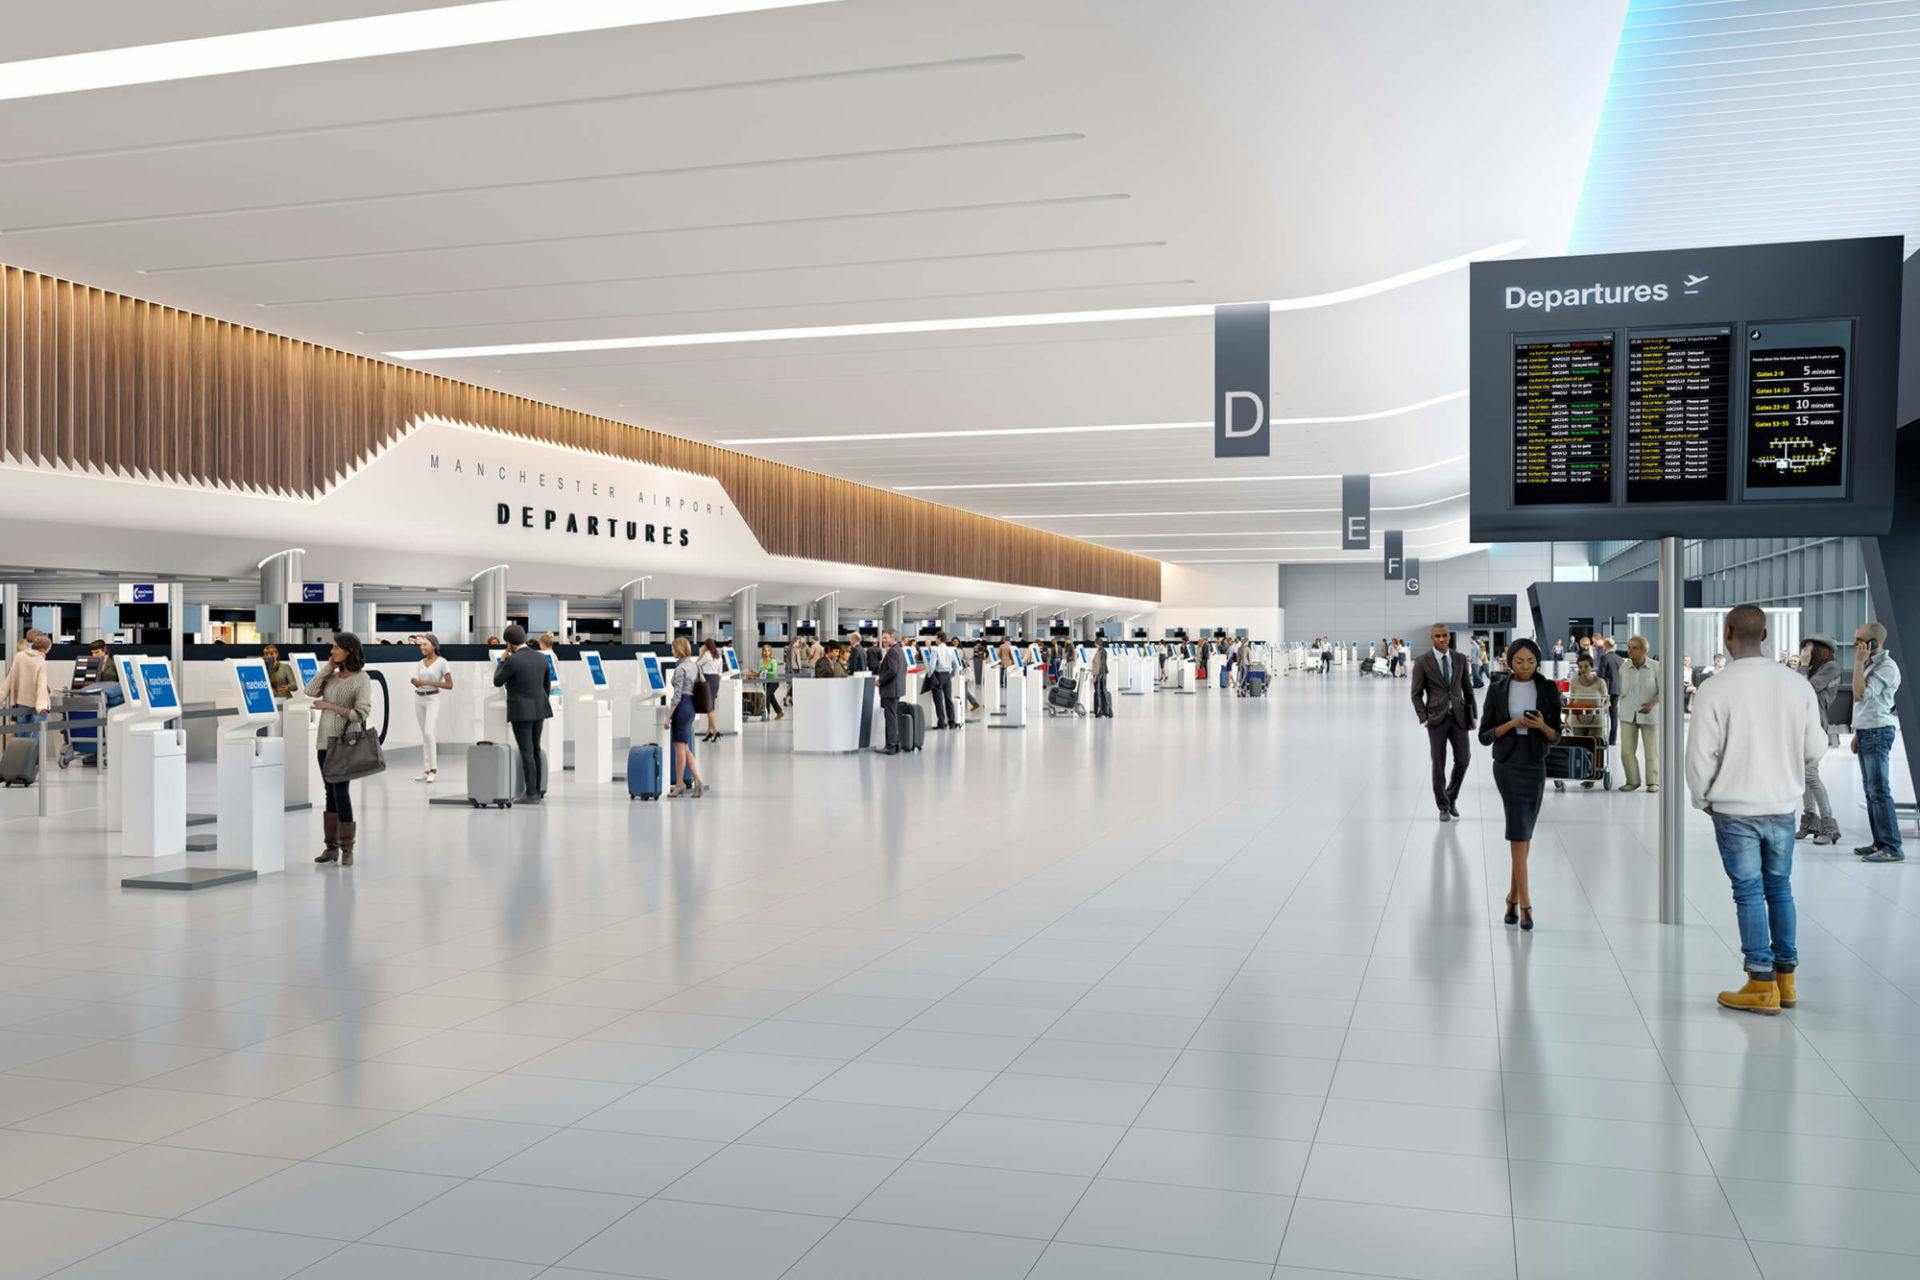 Interior image of Manchester airport departures